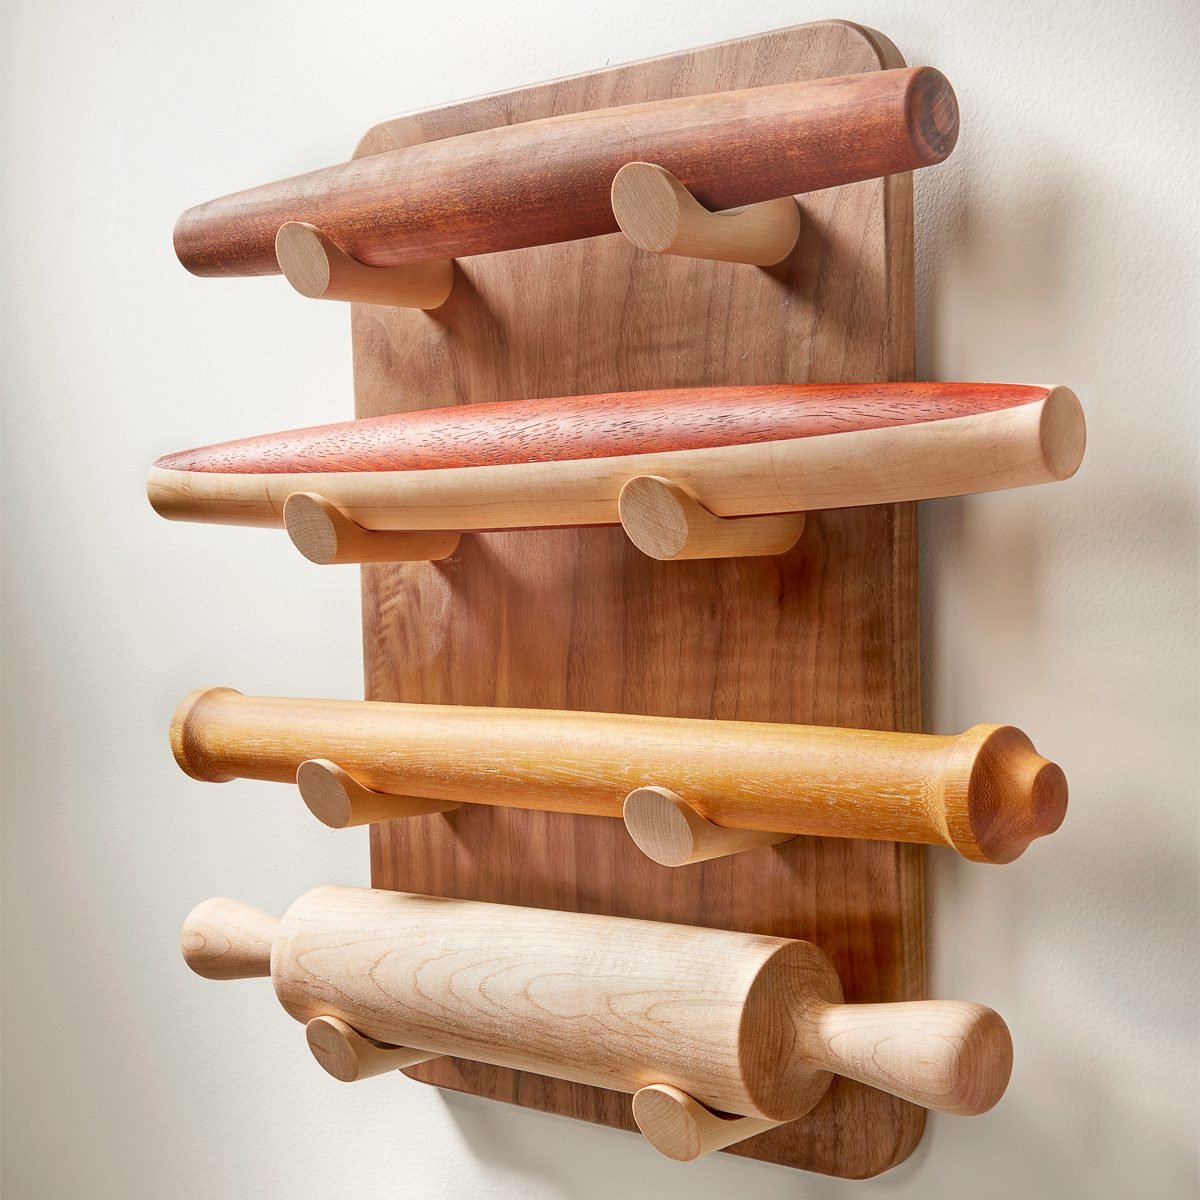 How to Make an Elegant Rolling Pin to Use and Display (DIY)